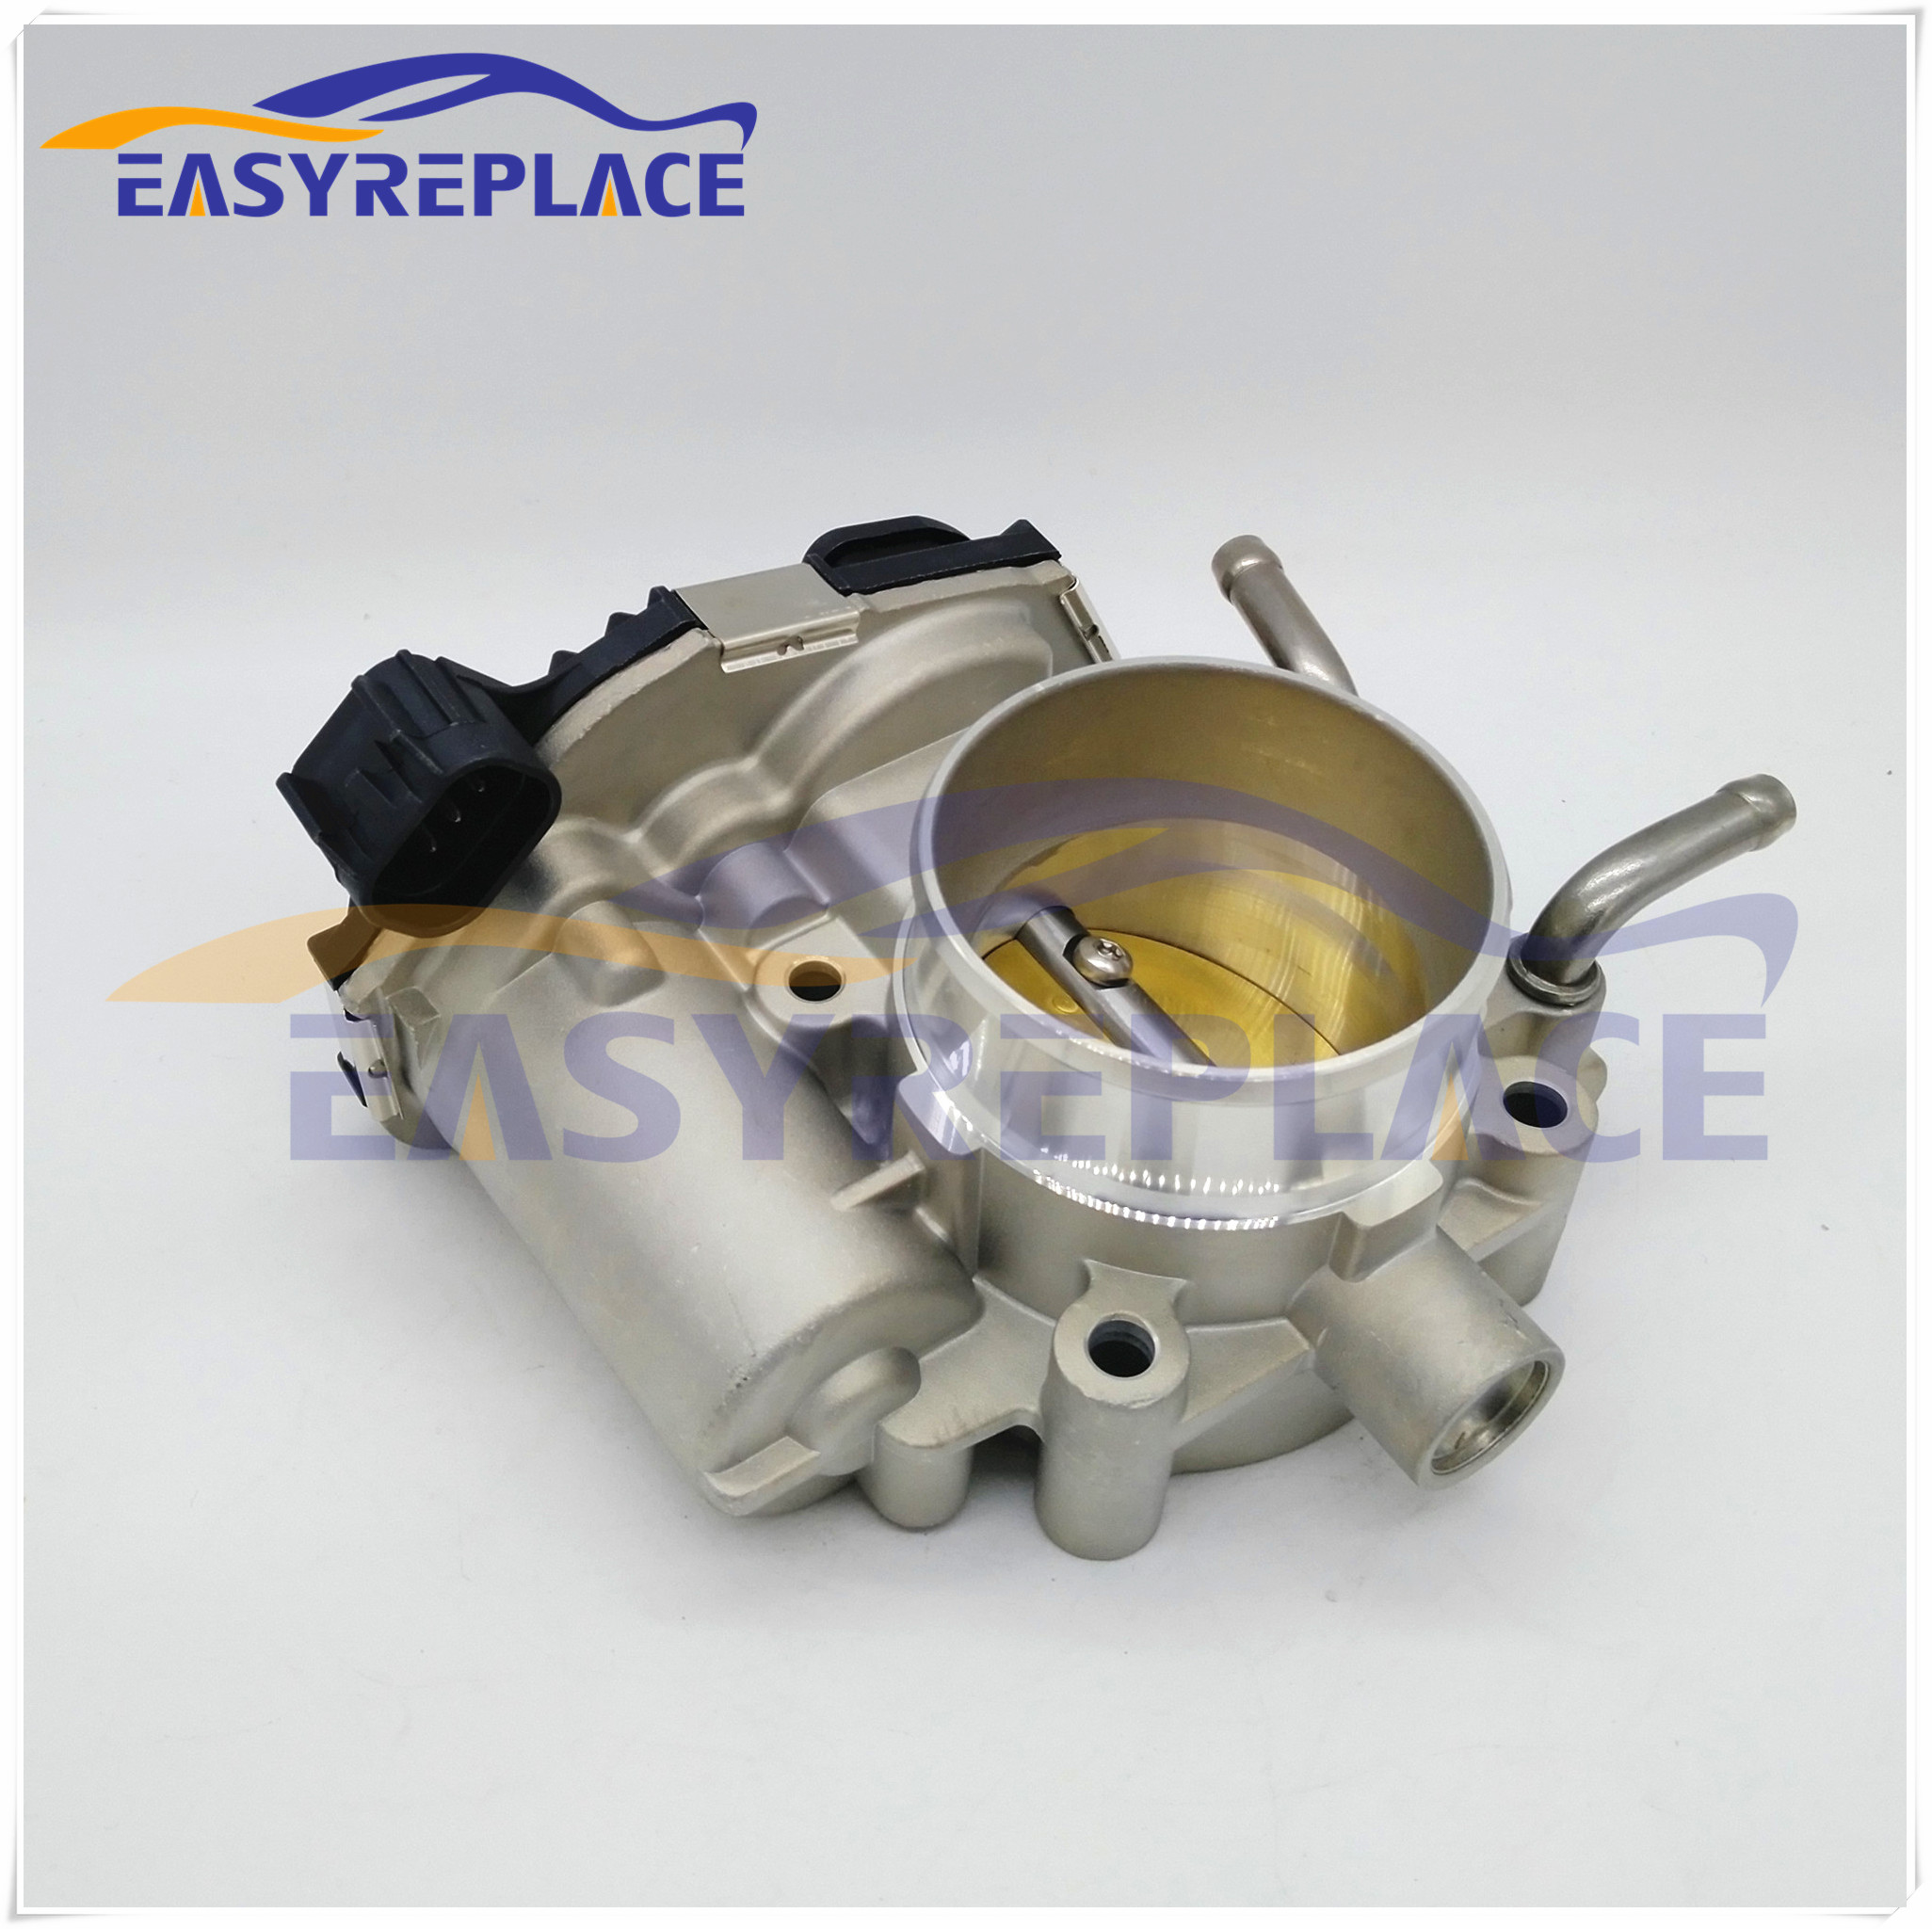 Fuel Injection New Throttle body Valve OE: 9023782 0280750549 96875270 For CHEVROLET Sail 1.4 Sonic 1.4 2010-2015